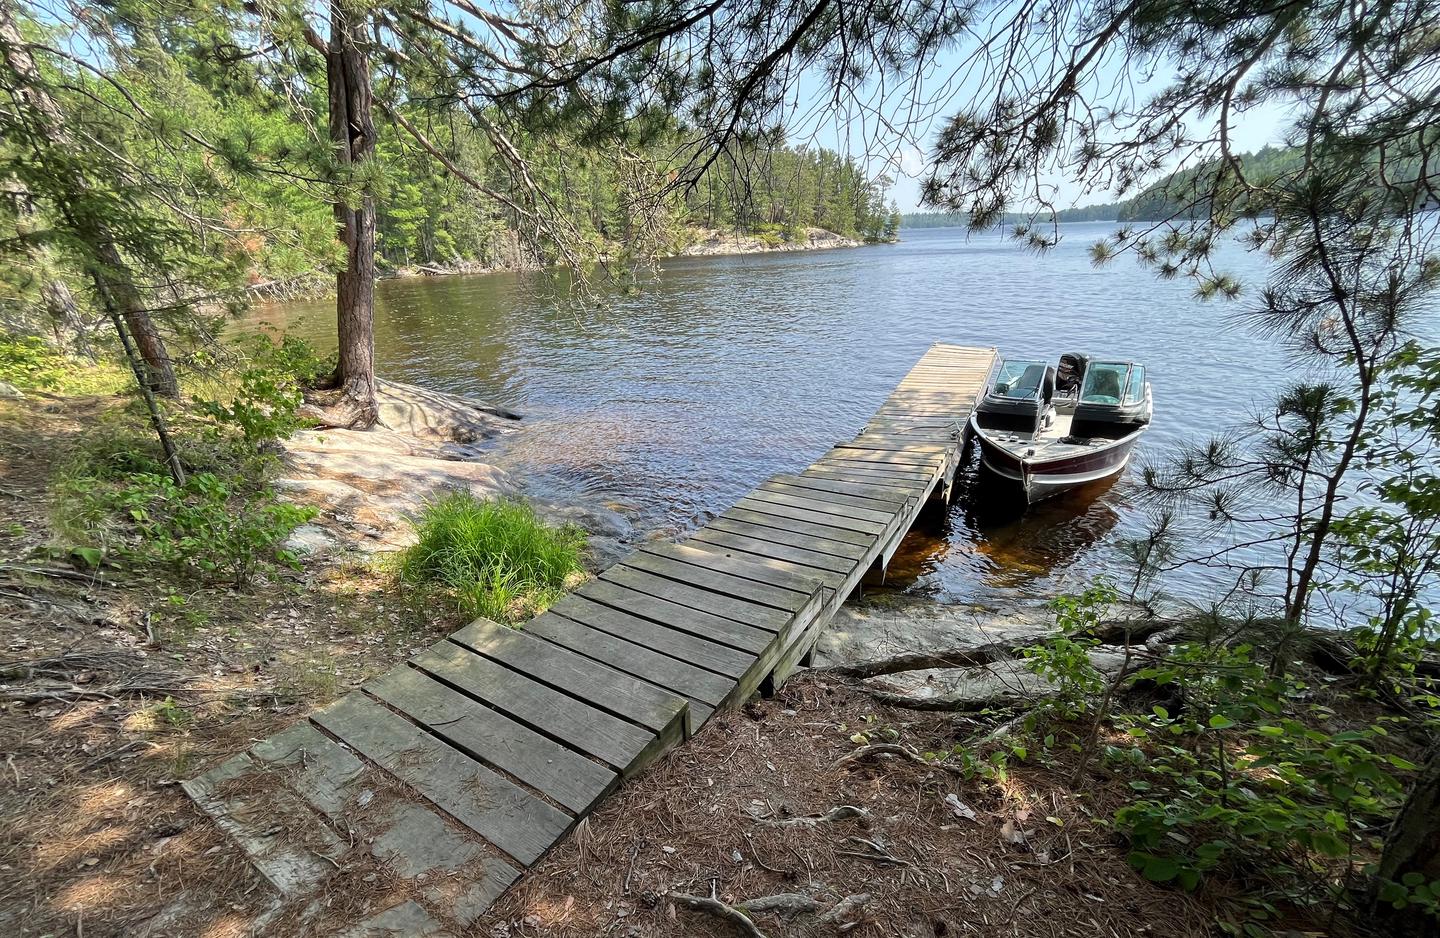 View of wood dock landing from shore with a boat tied to the dock.View of dock landing from shore.